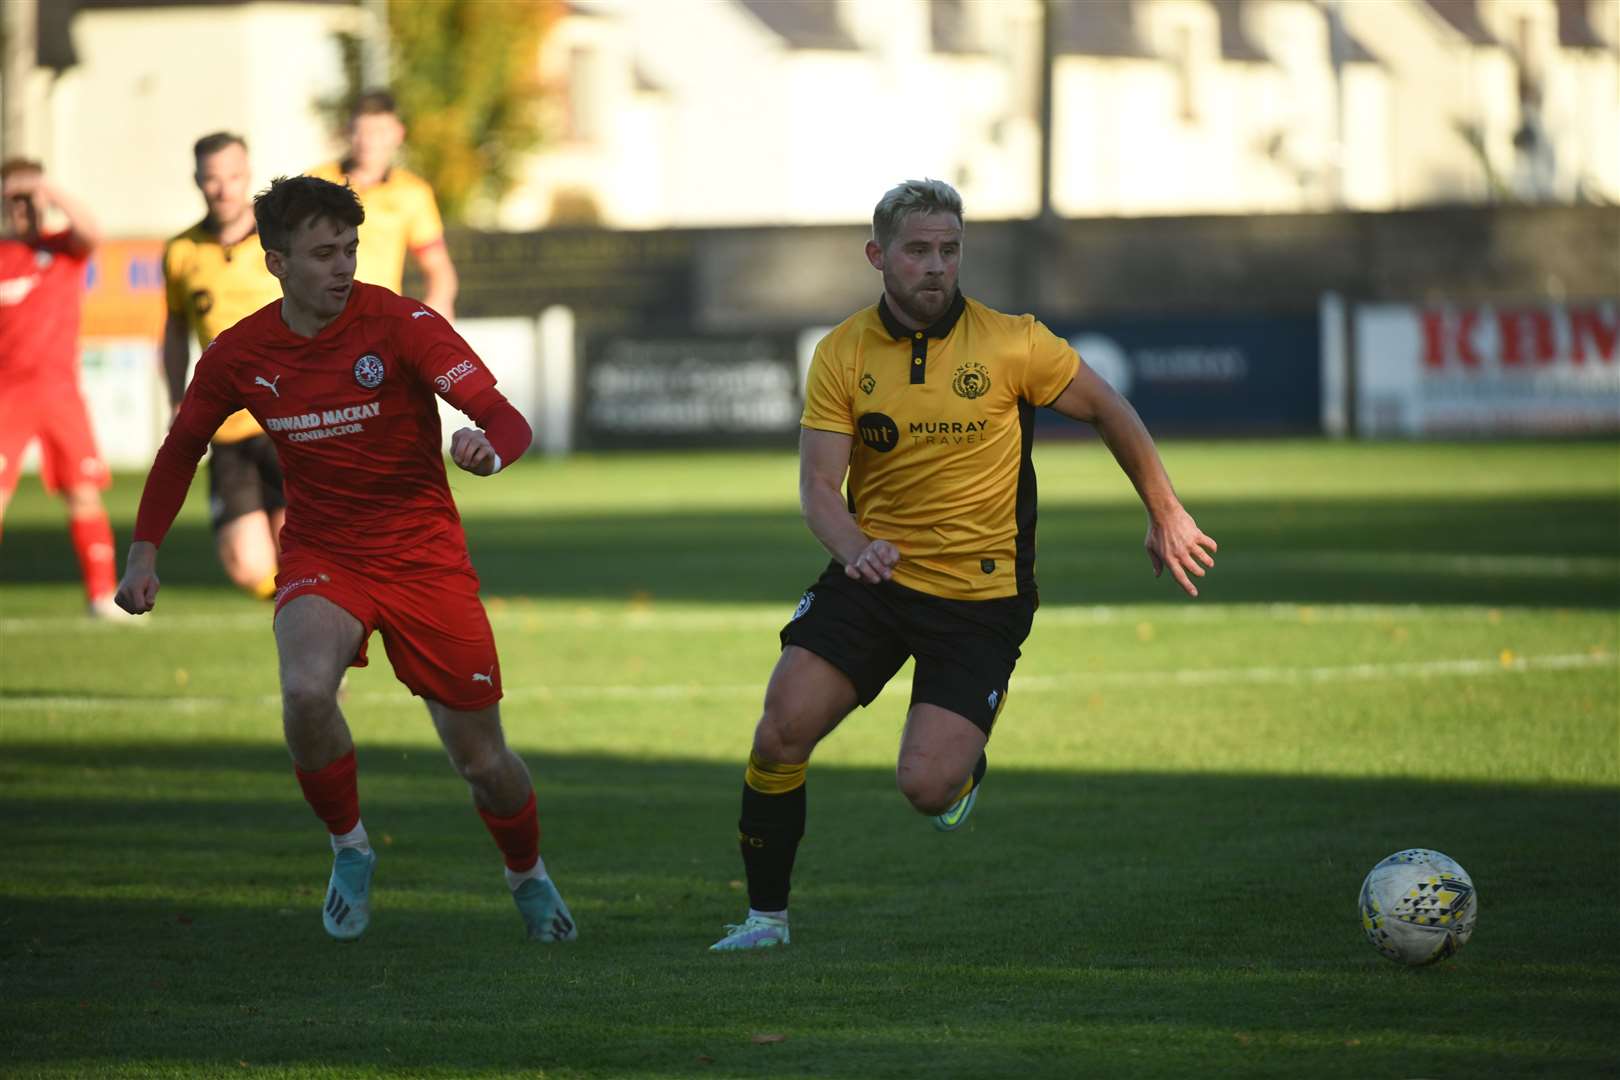 Gregor MacDonald (left) in action for Brora Rangers, who have loaned the midfielder out to Forres. Photo: James Mackenzie